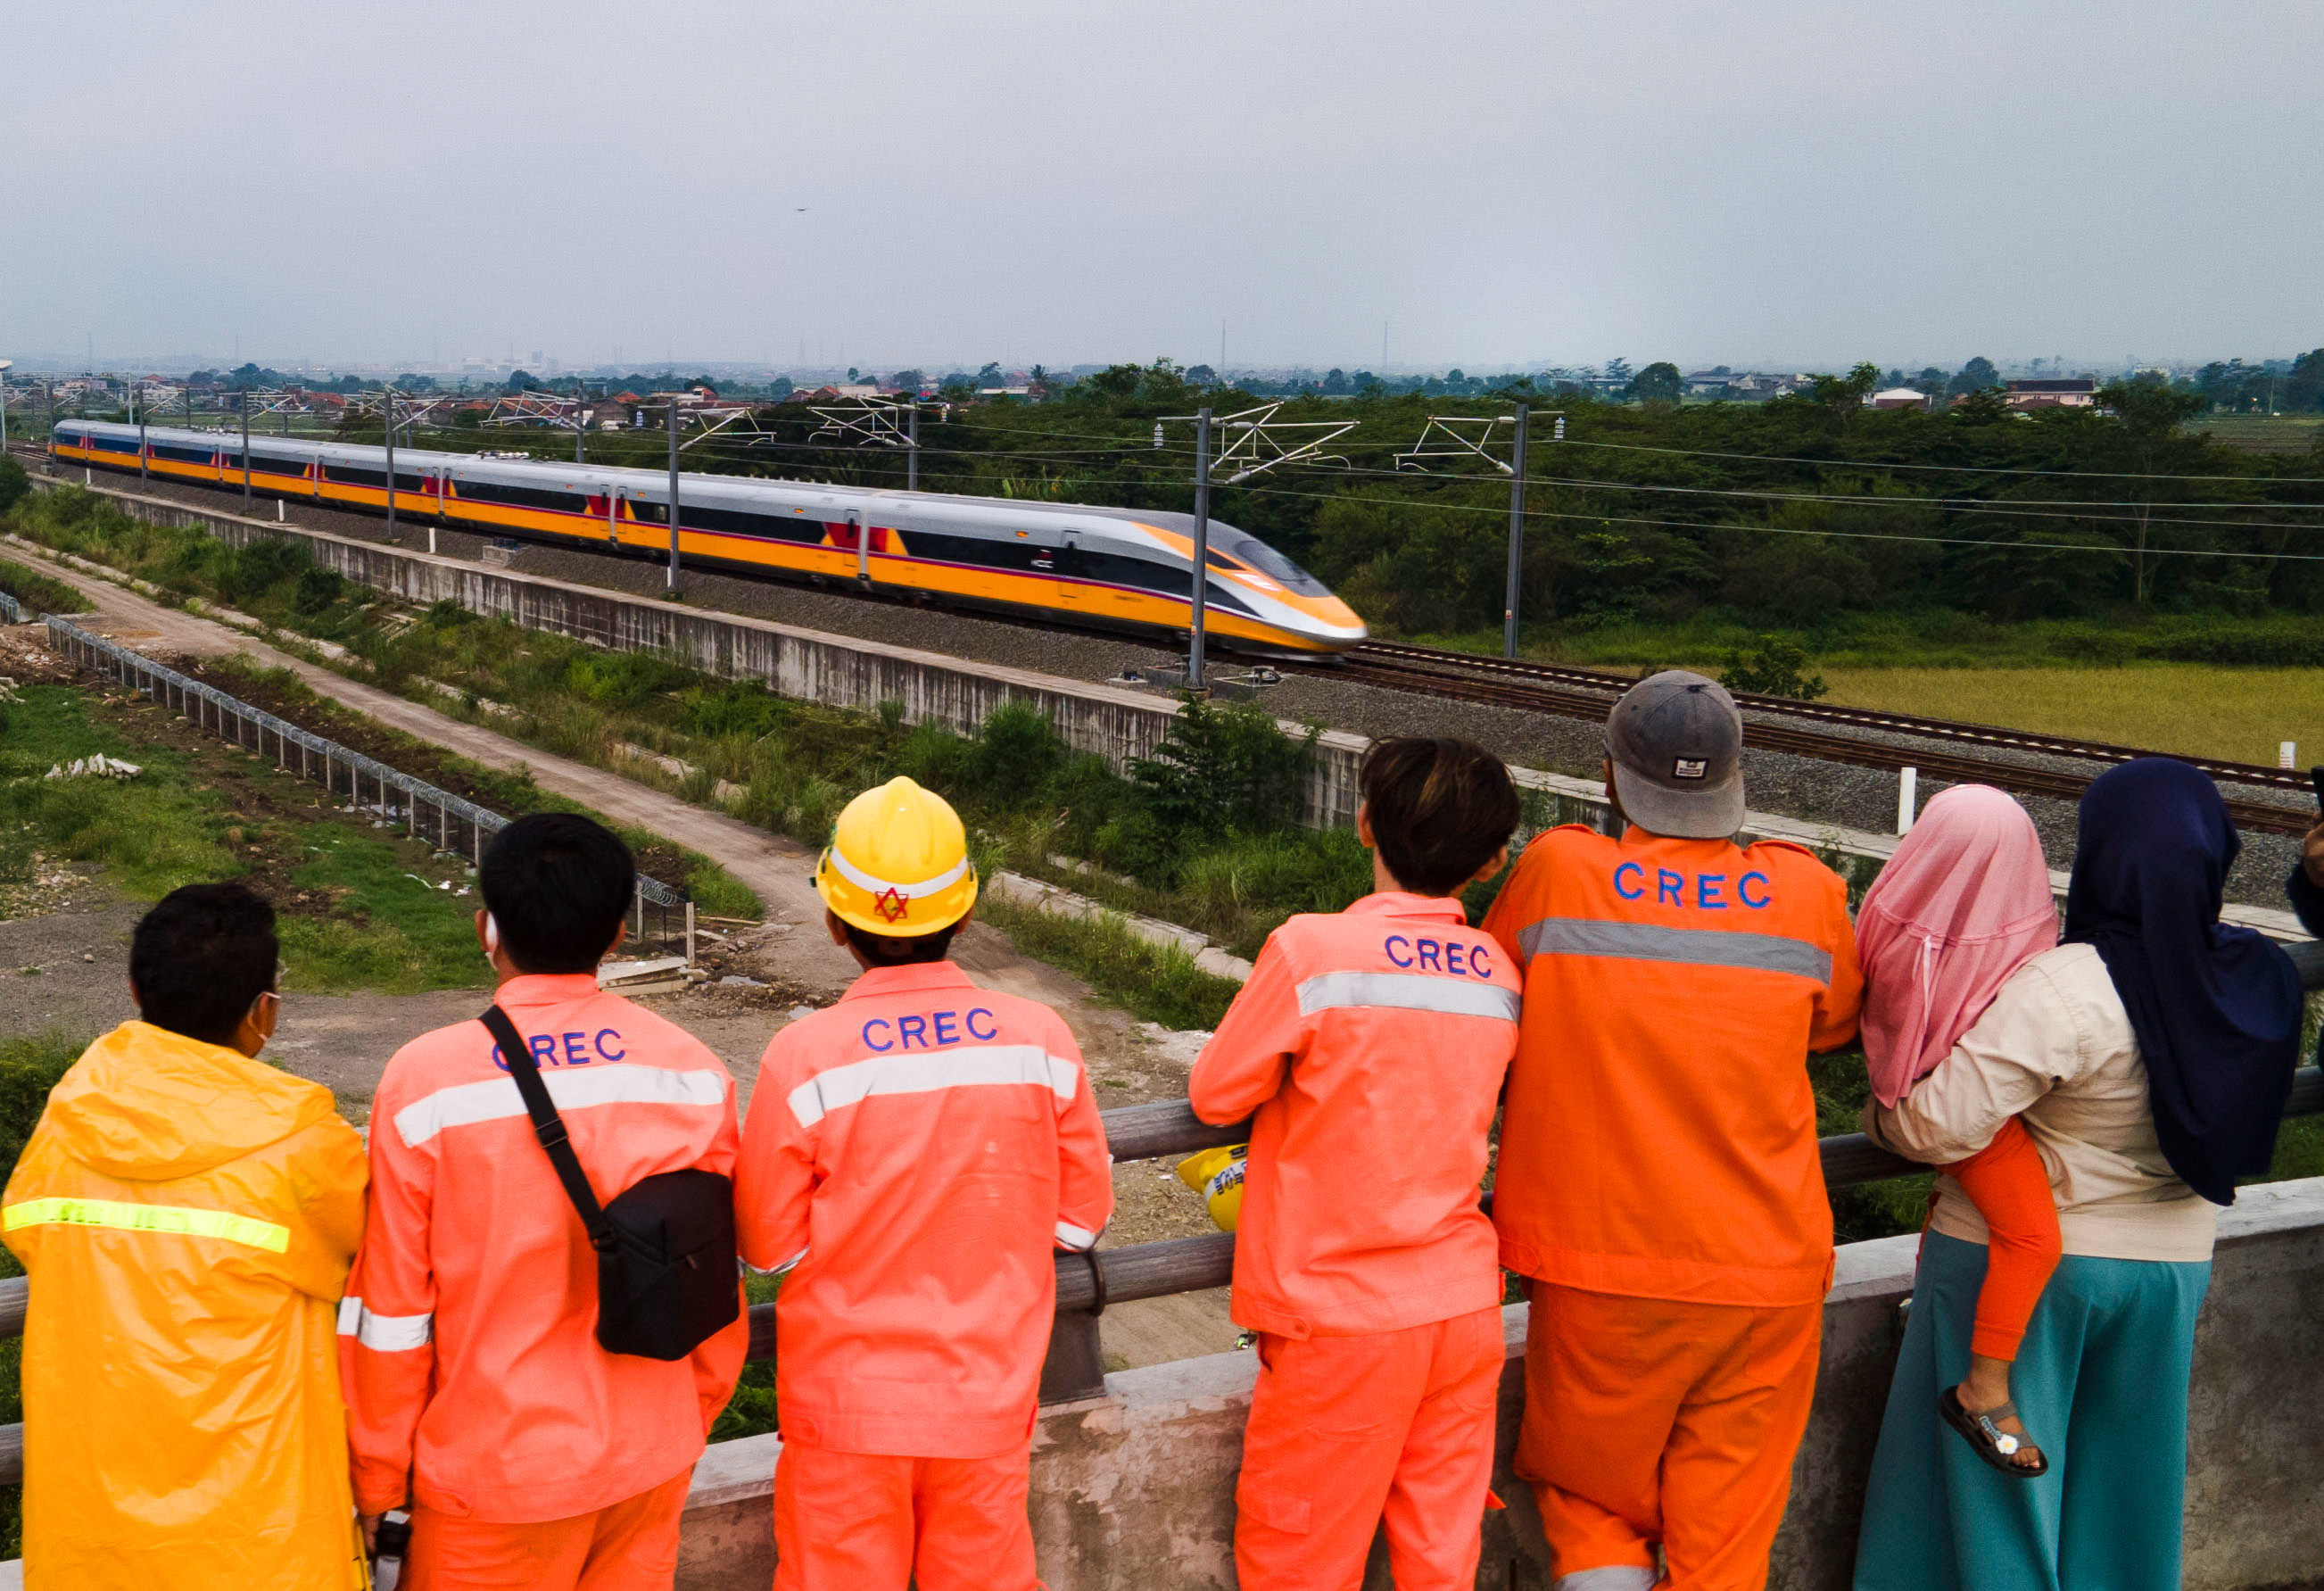 Tests are conducted in Indonesia on the Jakarta-Bandung High-Speed Railway, built using Chinese technology and in conjunction with the Belt and Road Initiative. Photo: Xinhua